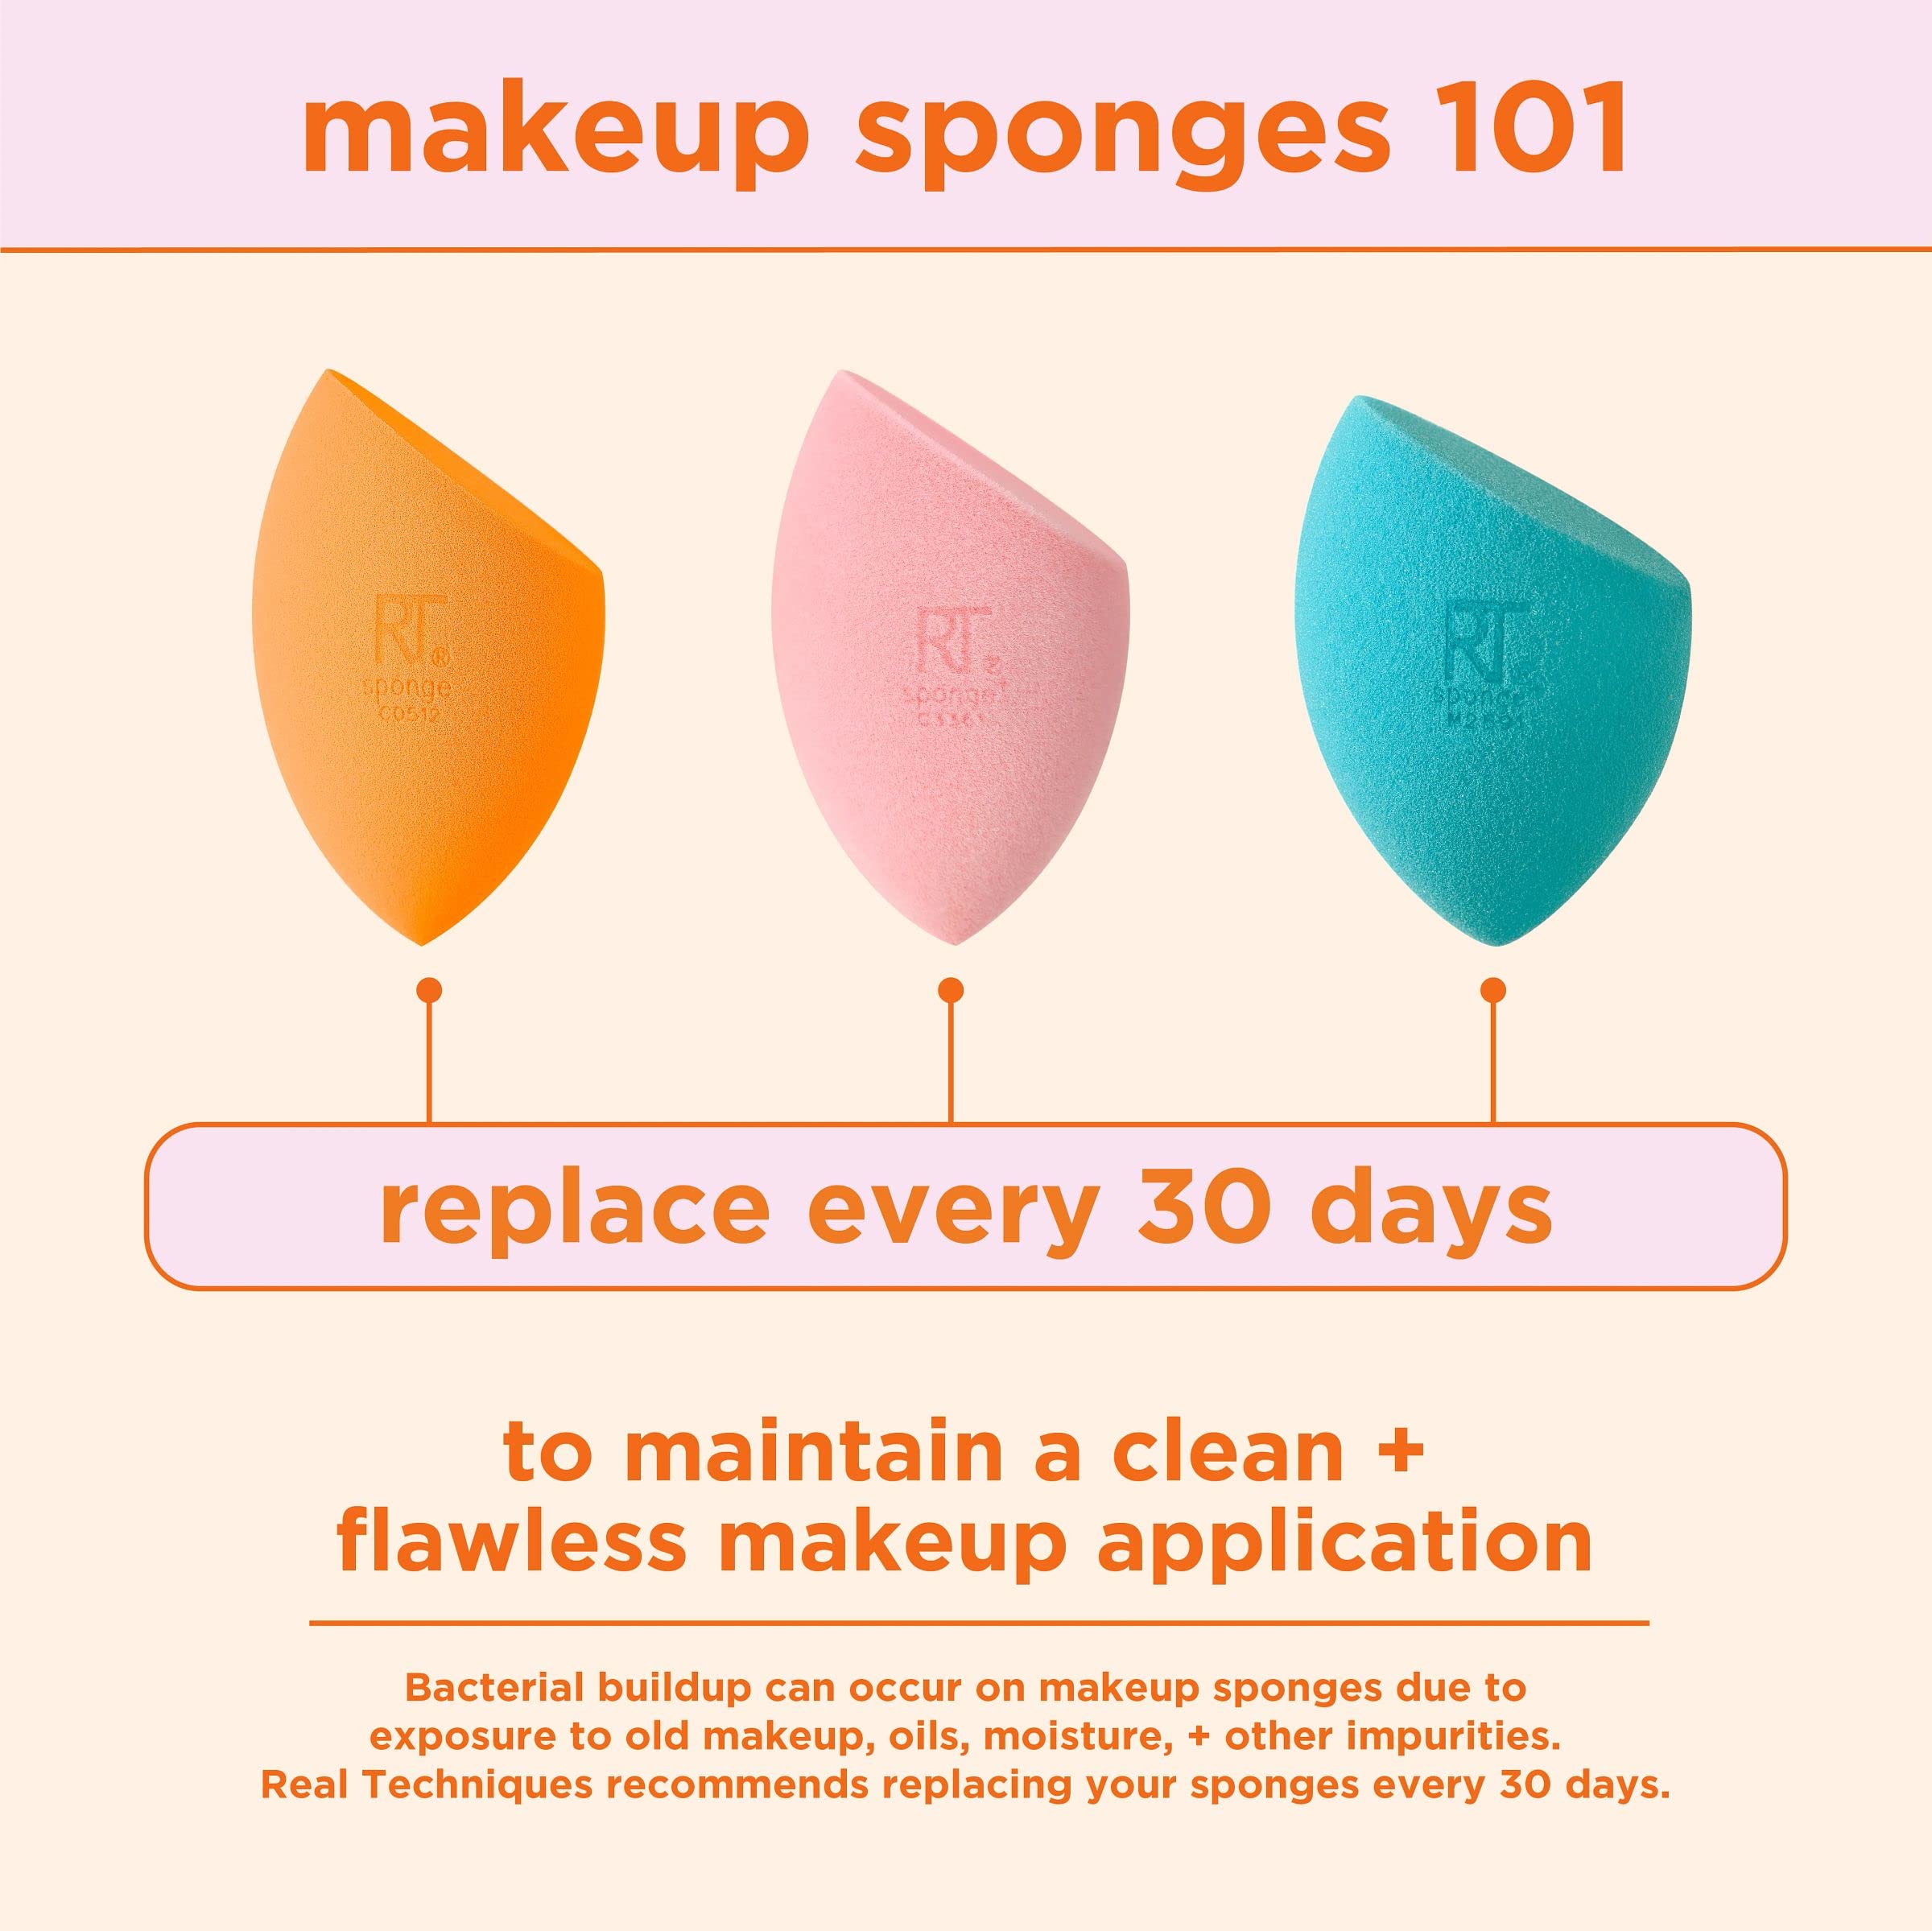 Real Techniques Miracle Complexion Assorted Beauty Sponges Makeup Blender, For Blending & Sculpting, Full Coverage, Professional Makeup Tool, Cruelty Free, Vegan, Latex Free, 6 Piece Sponge Set